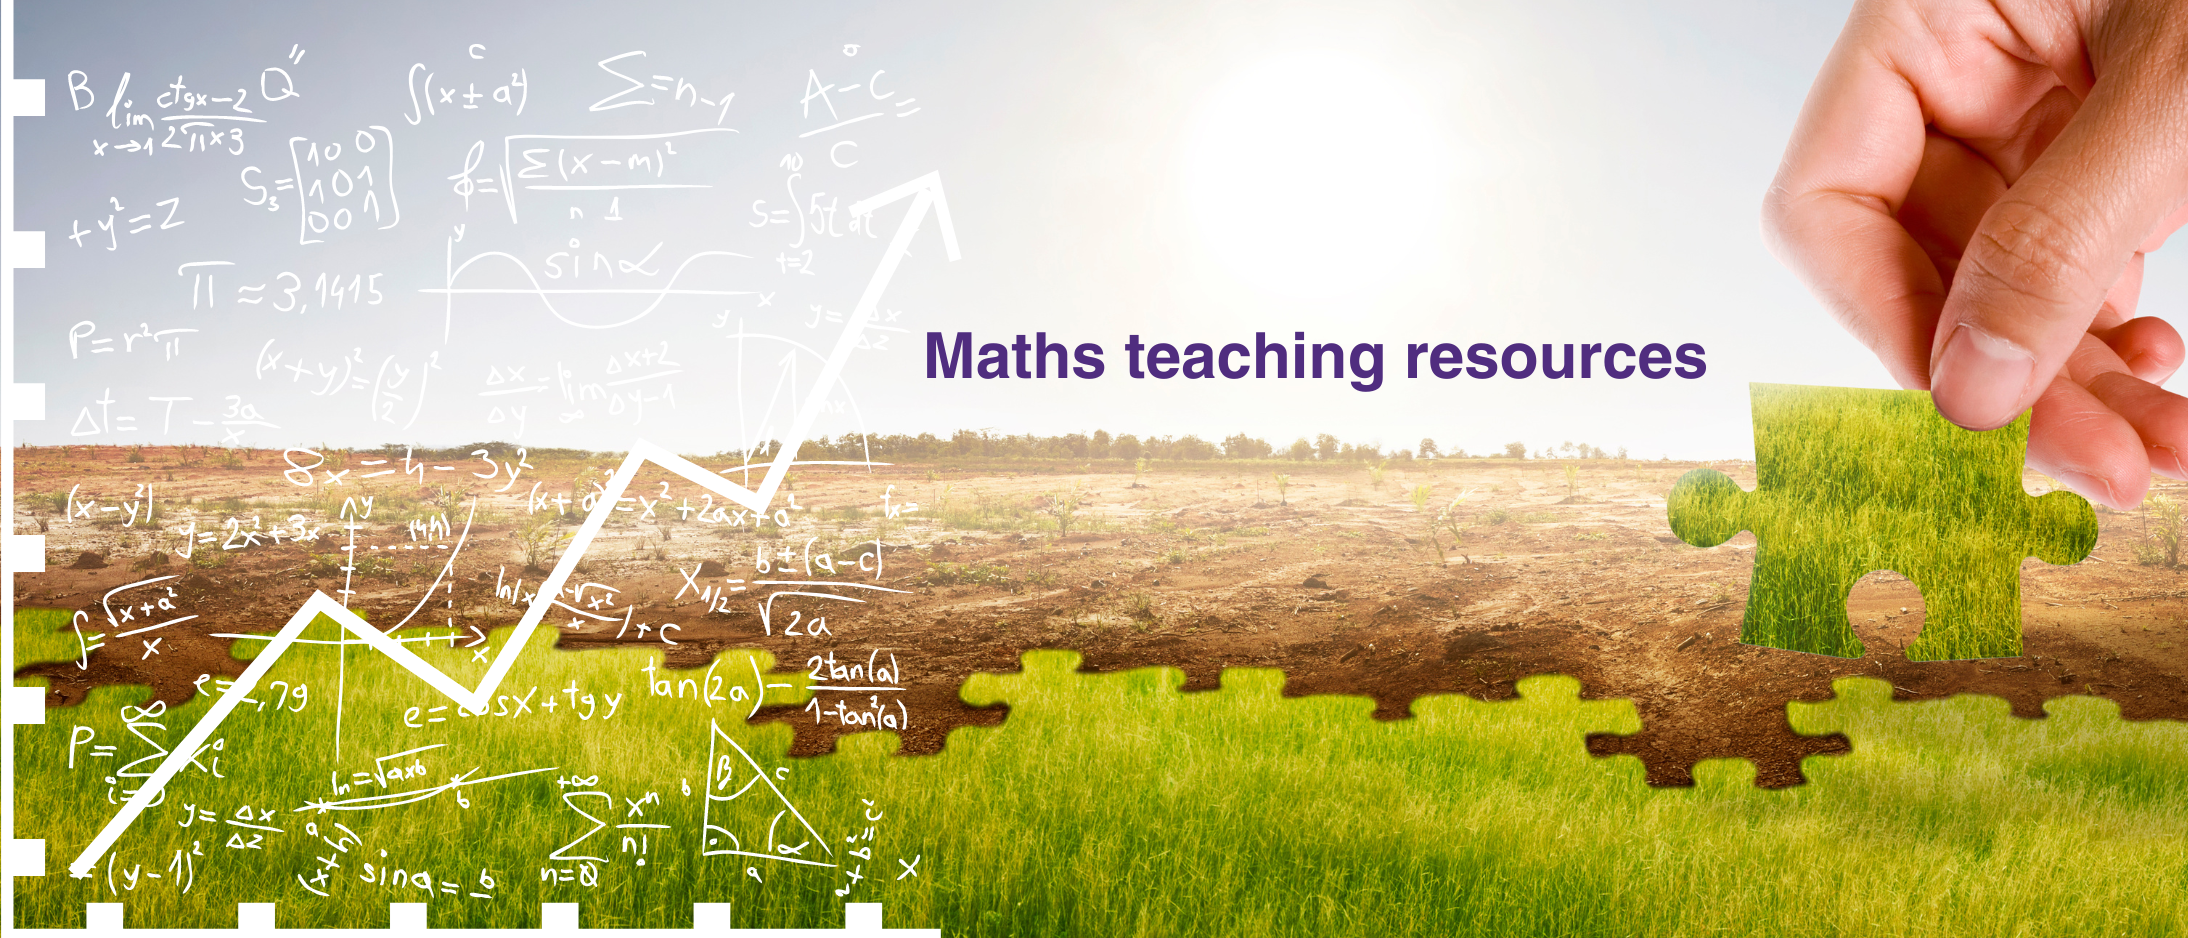 Green land moving into drought with jigsaw pieces and maths symbols overlaying. Copy says Maths Teaching Resources